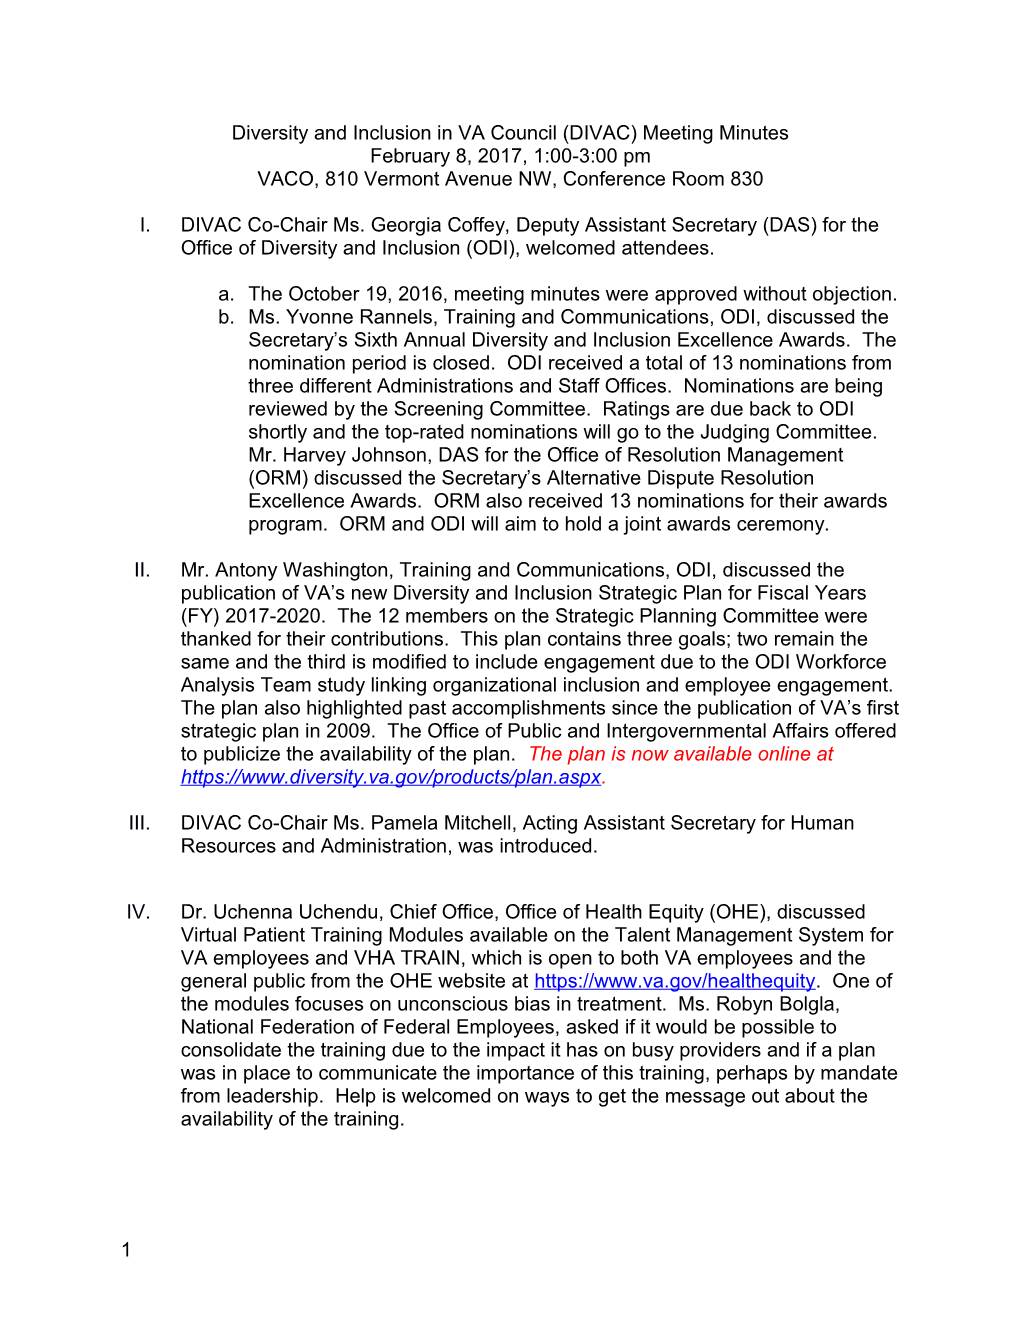 Diversity and Inclusion in VA Council (DIVAC) Meeting Minutes s1